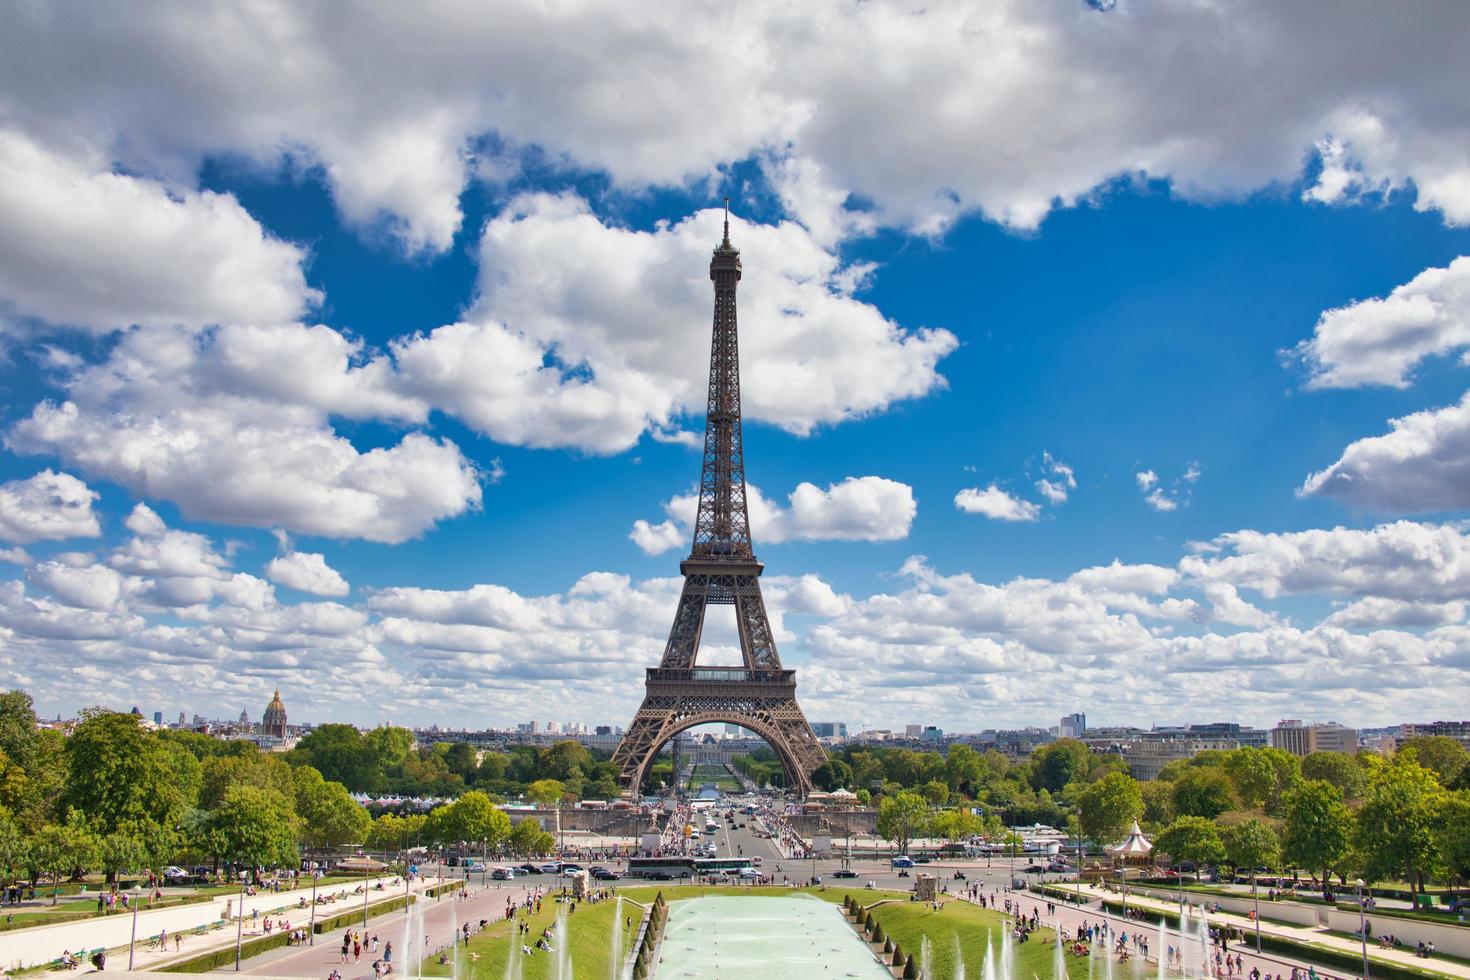 Eiffel Tower at Paris France 3407768 Stock Photo at Vecteezy